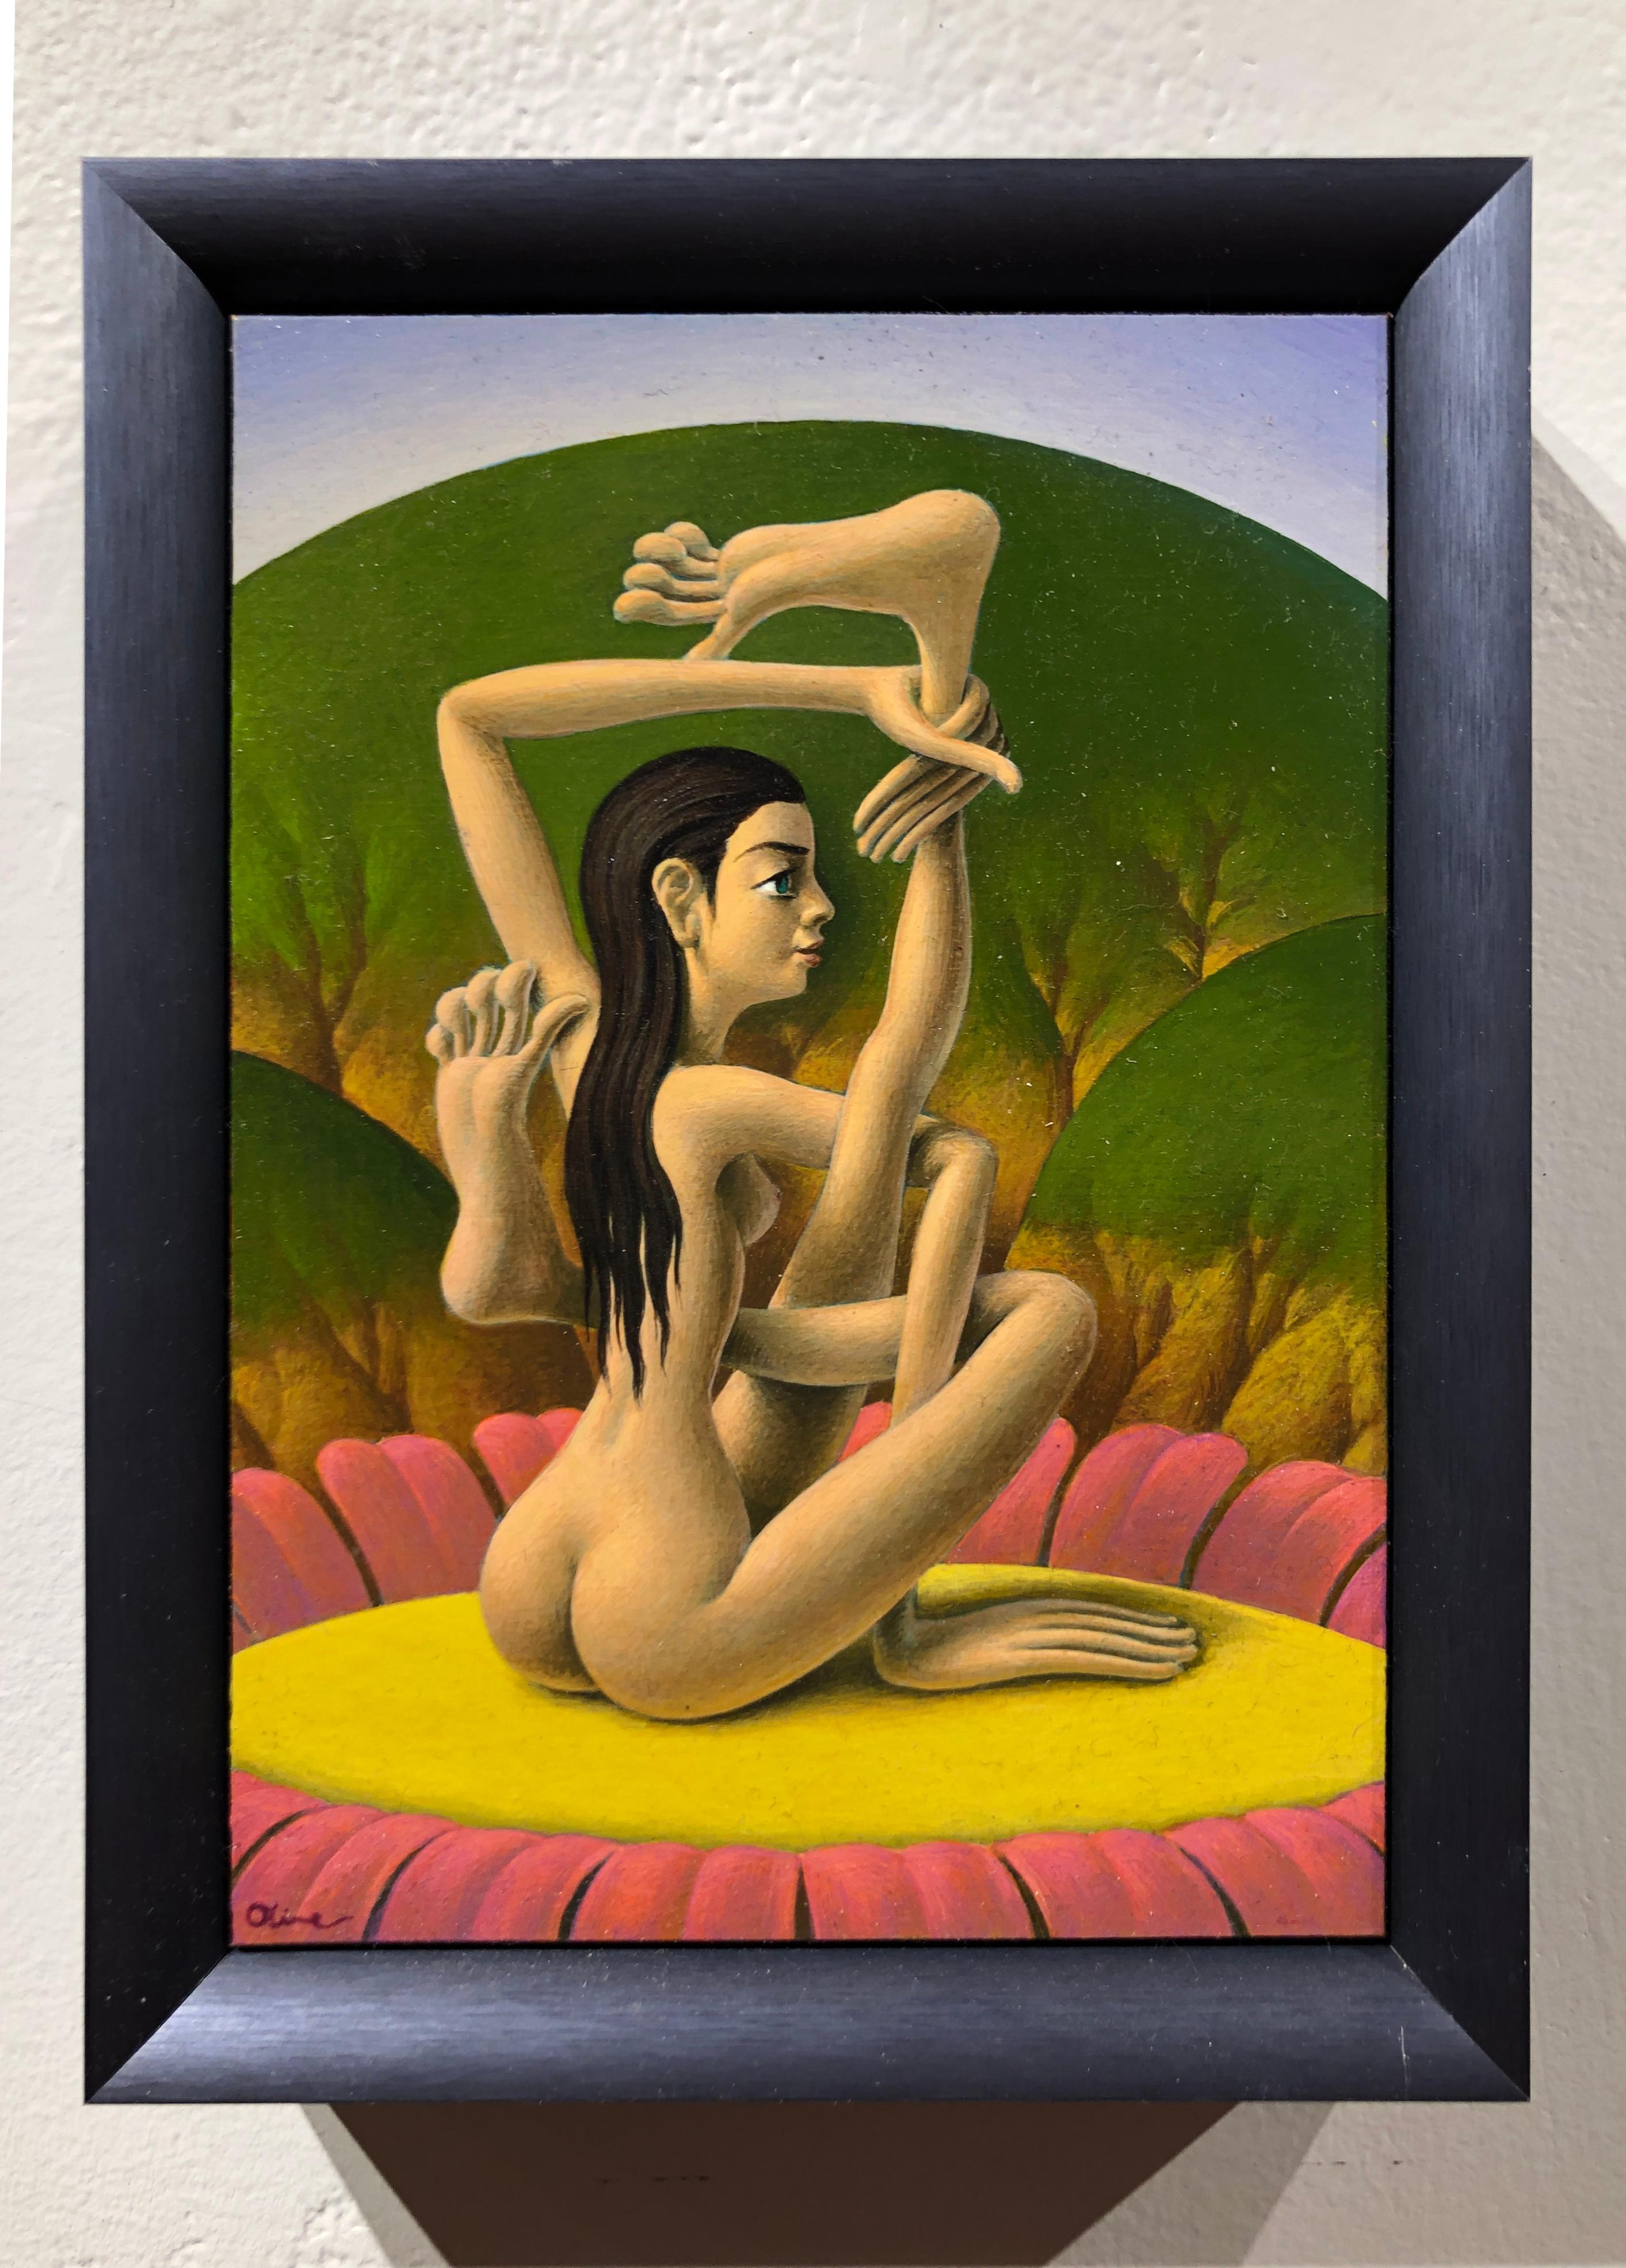 Yogini, Female Nude in a Quite Impossible Yoga Pose, Acrylic on Panel, Framed - Painting by Oliver Hazard Benson